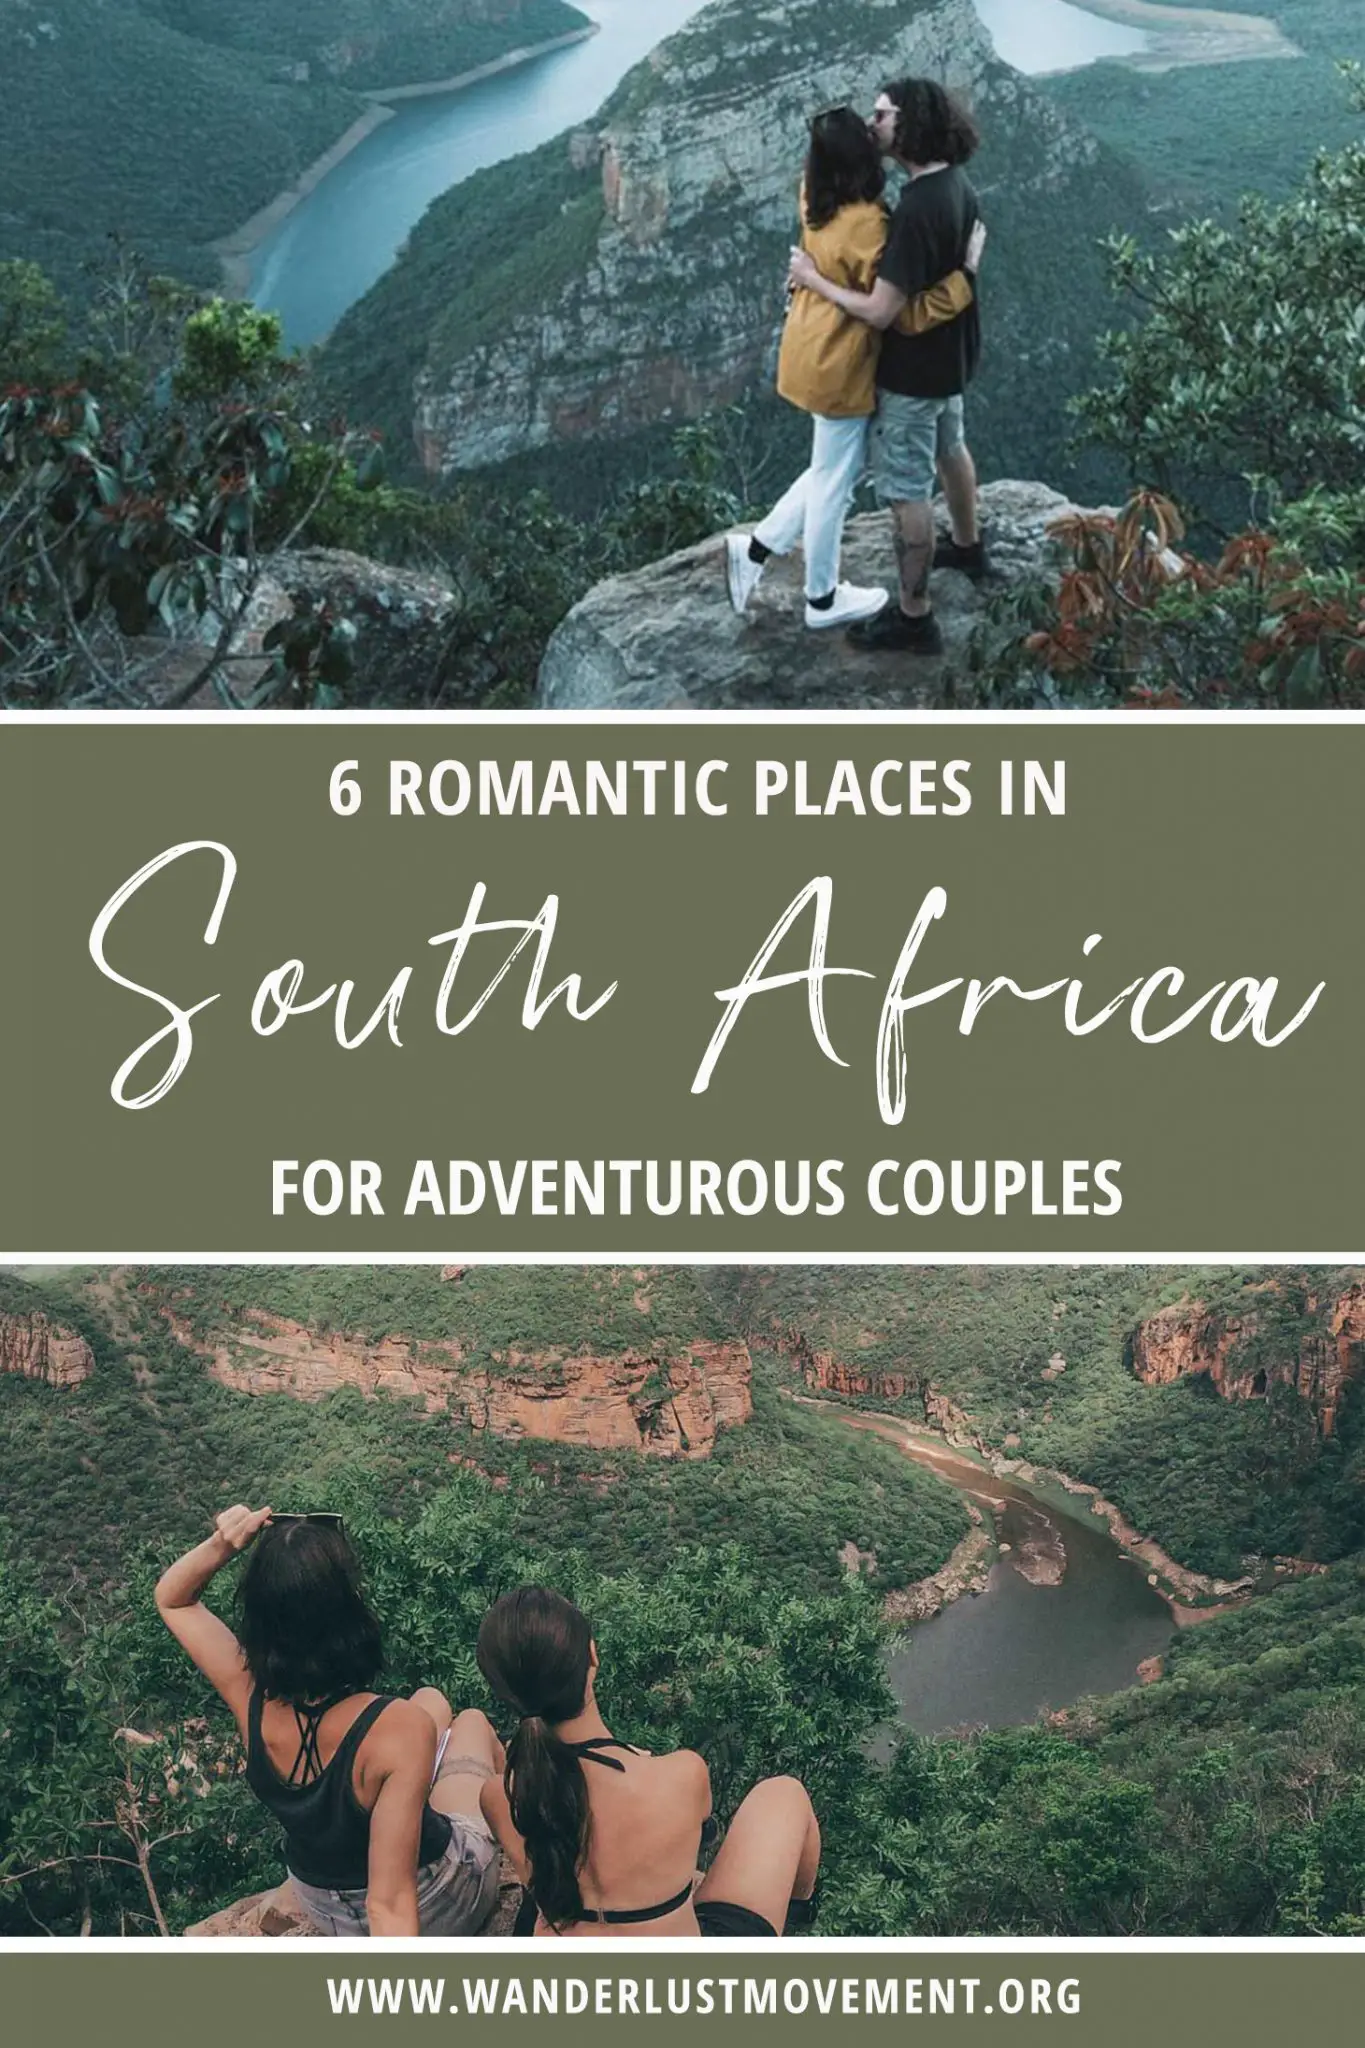 6 Romantic Places in South Africa for Adventurous Couples